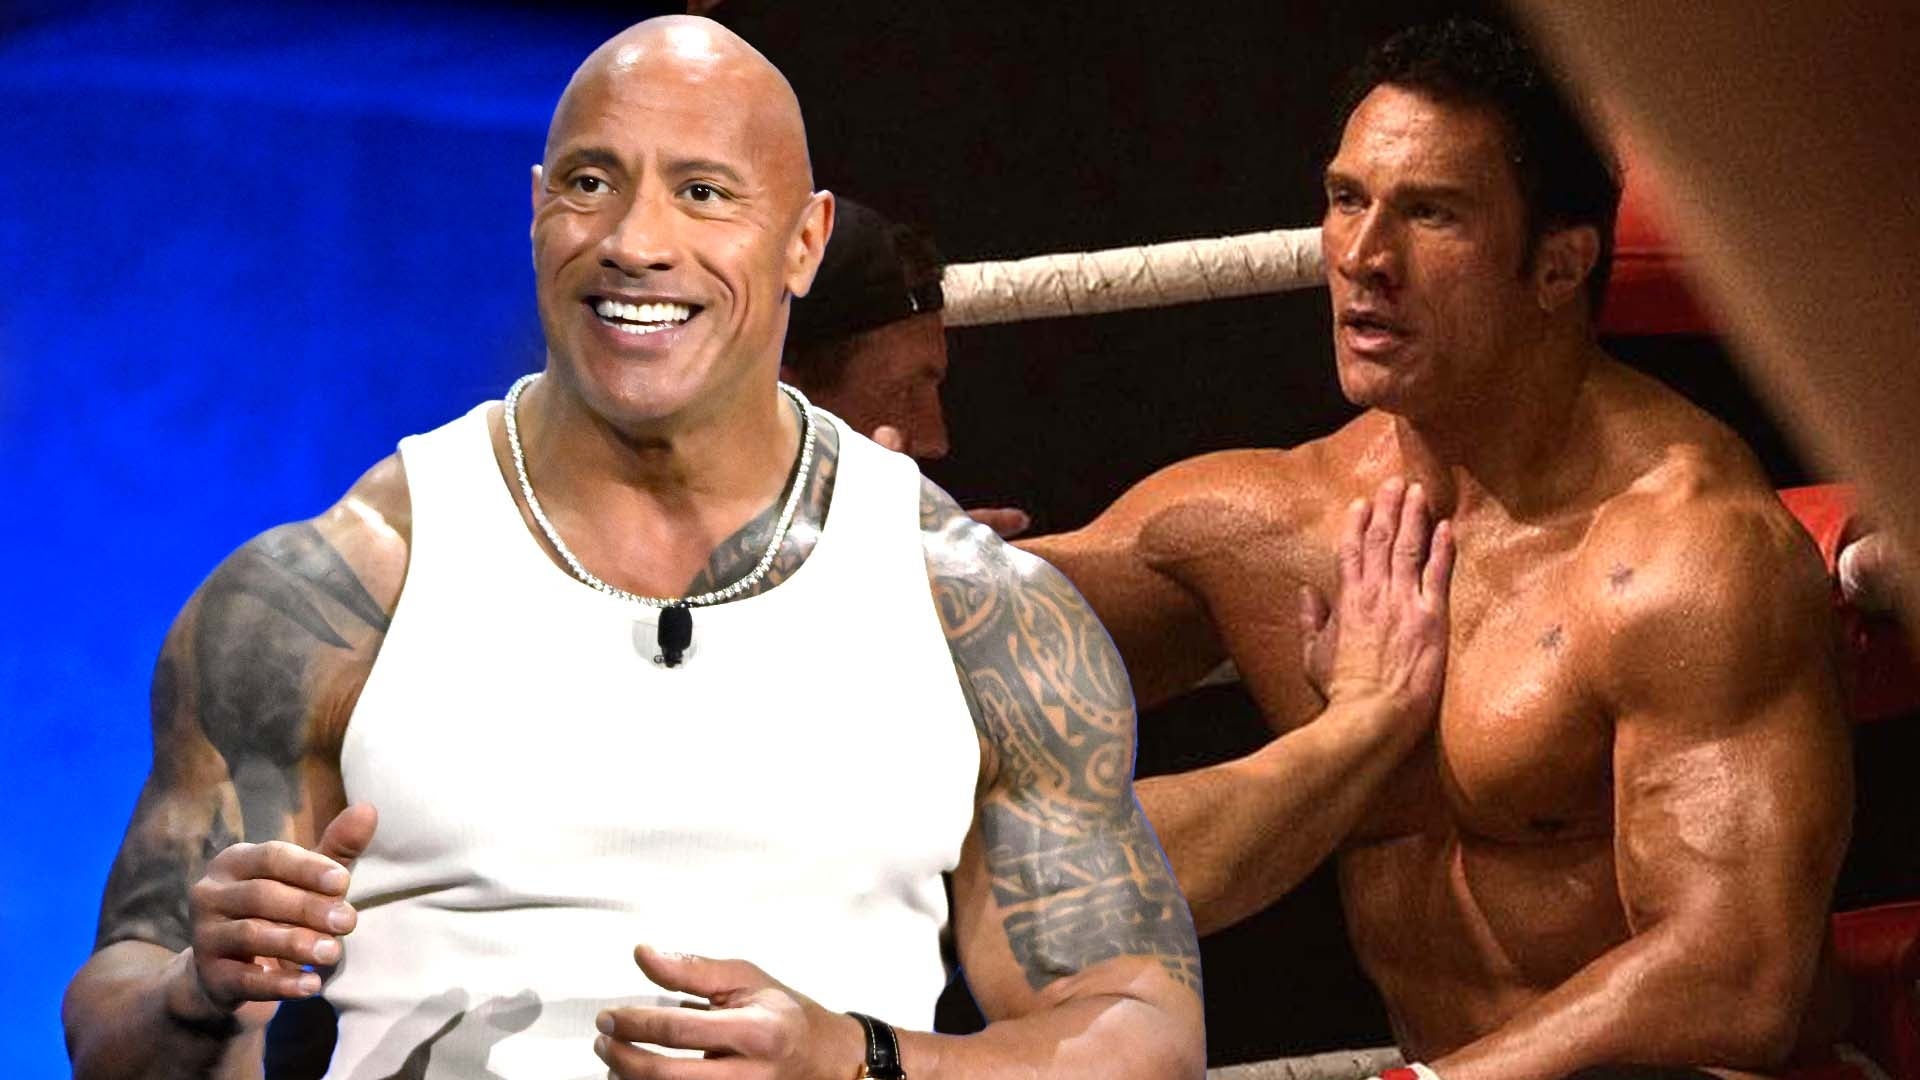 Dwayne Johnson Transforms Into MMA Fighter Mark Kerr in First Look at 'The Smashing Machine'  